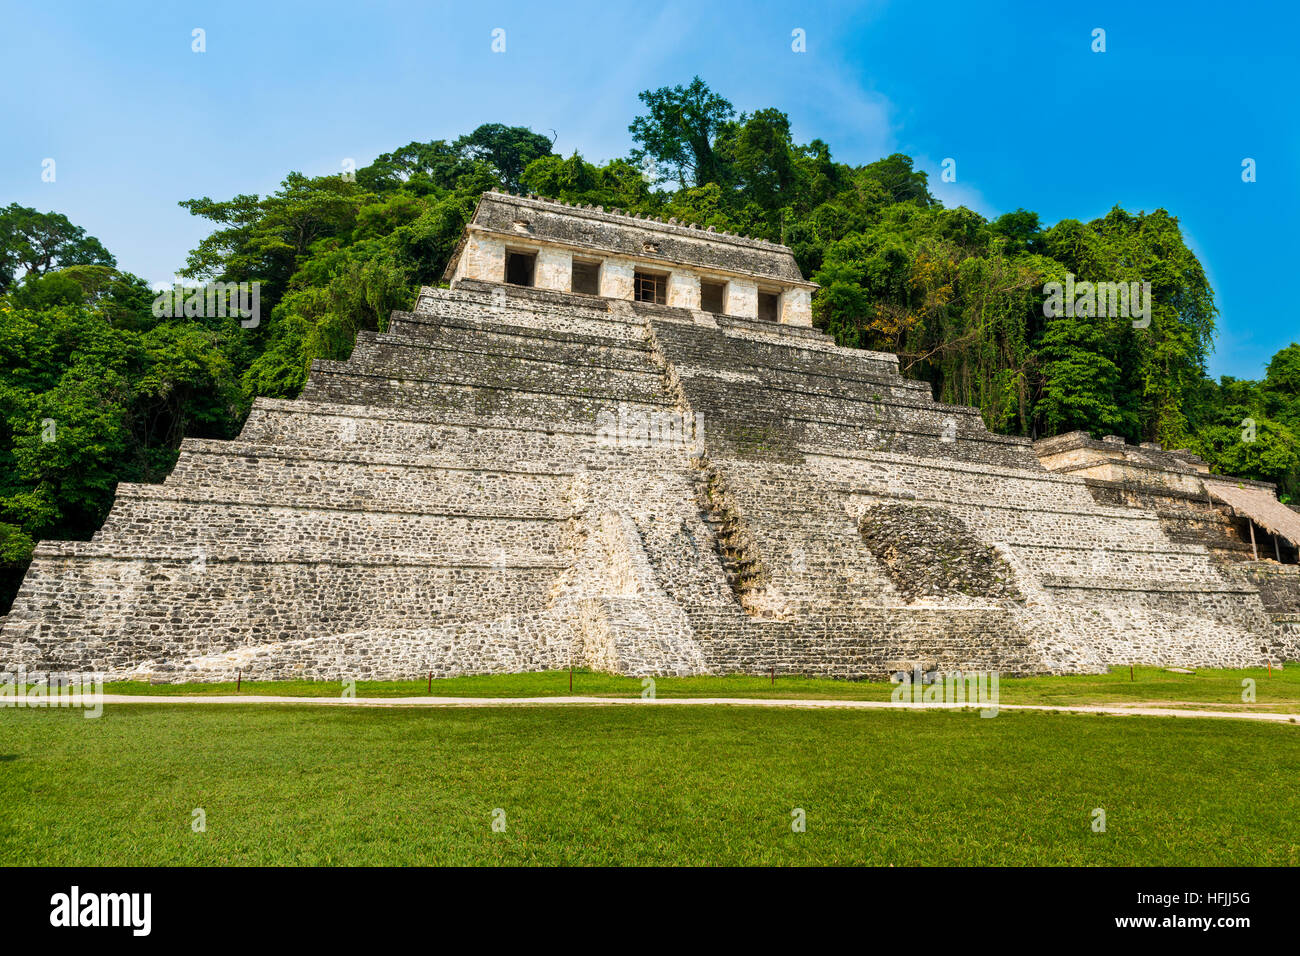 View of the Temple of Inscriptions in the ancient Mayan city of Palenque, Chiapas, Mexico Stock Photo